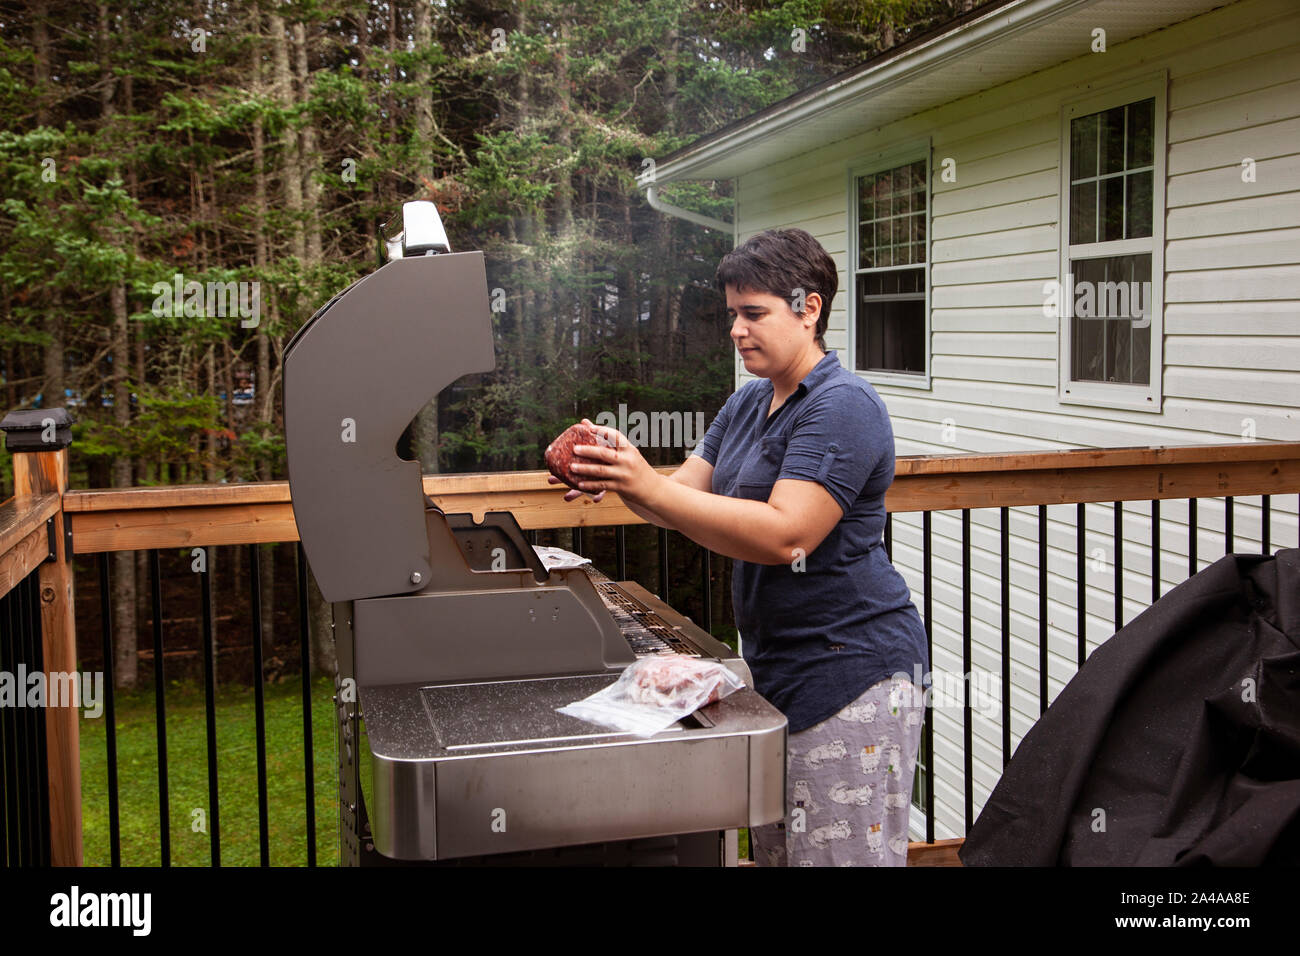 person bbq'ing their hamburger meat on the deck Stock Photo